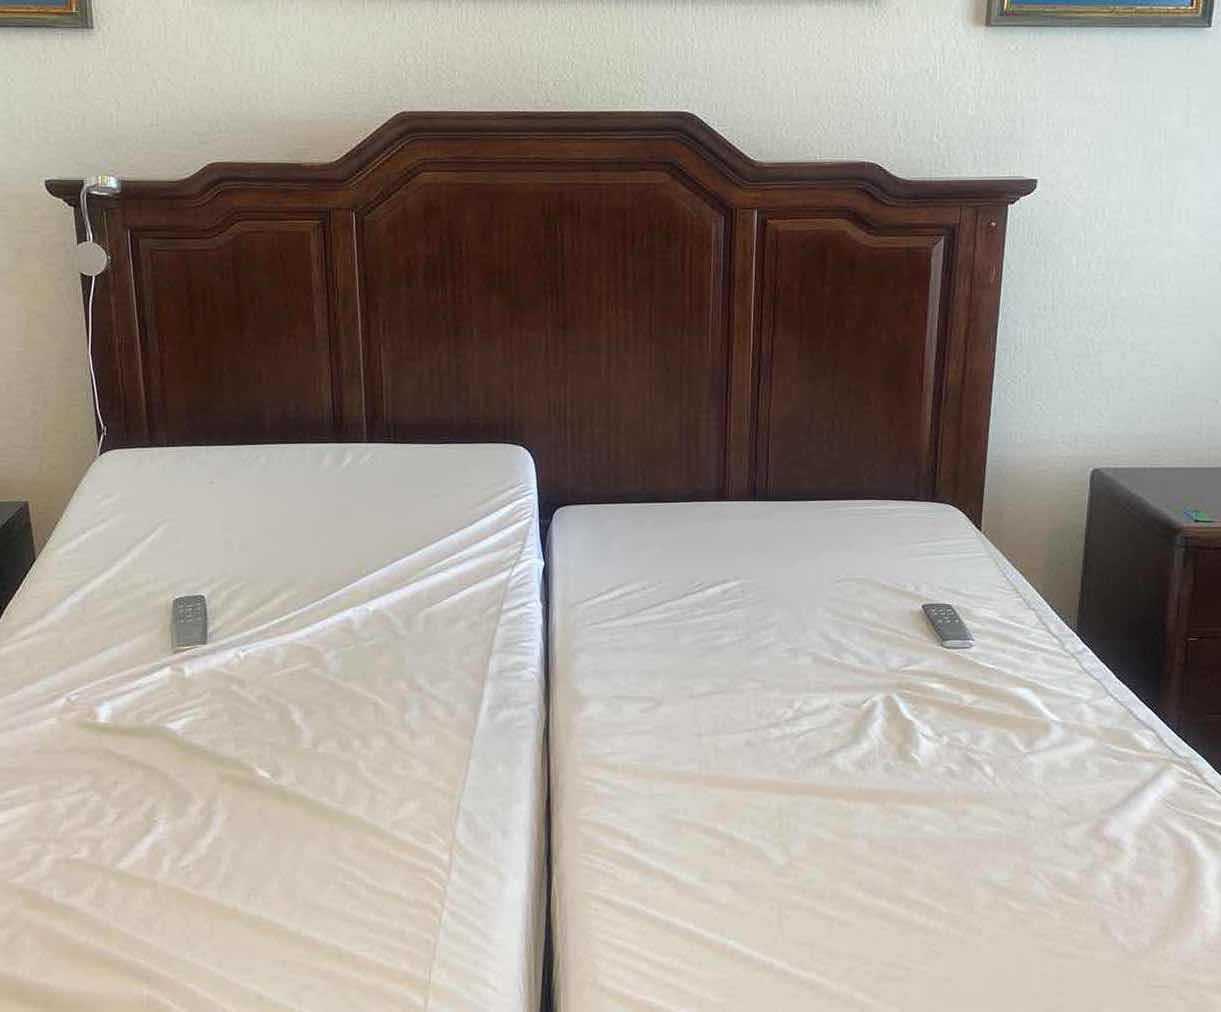 Photo 1 of BERNHARDT WOOD CAL/KING BEDFRAME WITH FOAM MATRESSES UNBRANDED) ADJUSTABLE BED 2 REMOTES 91” x 78” x 54 1/2”